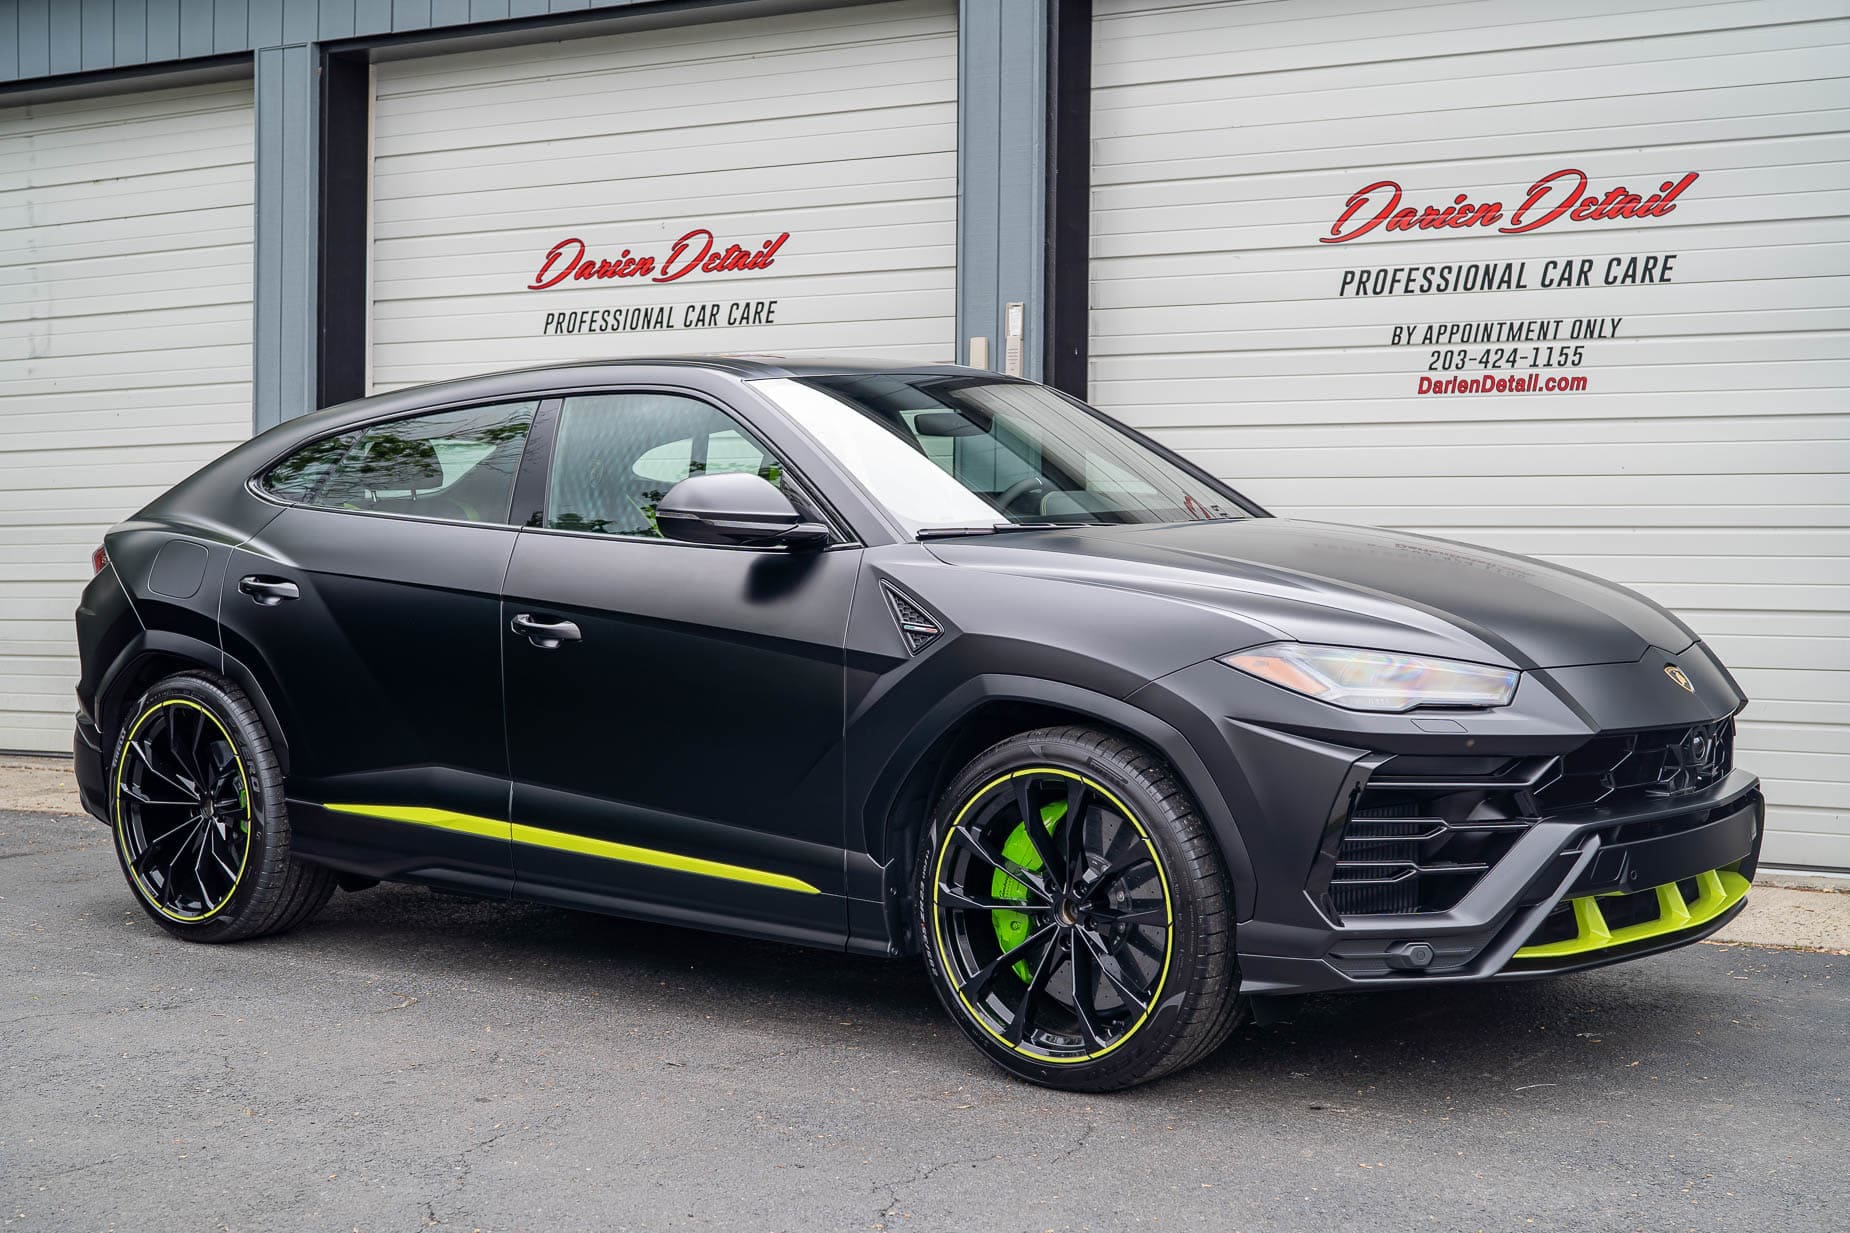 2021 Lamborghini Urus Matte Black Lime Green Accents And Calipers Xpel Stealth Paint Protection Film Ppf Ceramic Coating 02